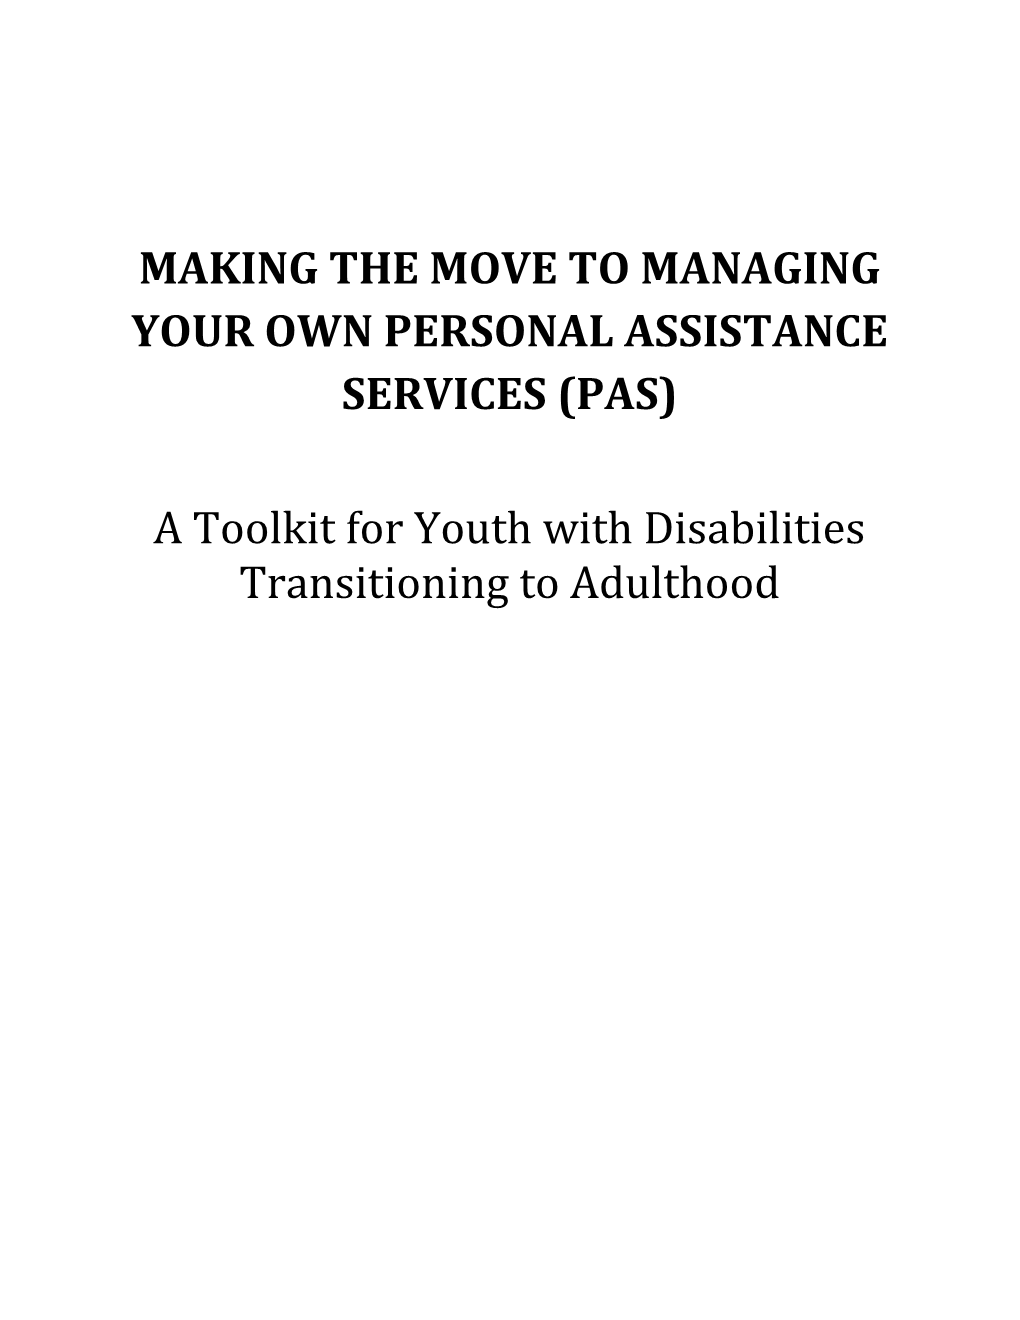 Making the Move to Managing Your Own Personal Assistance Services (Pas)